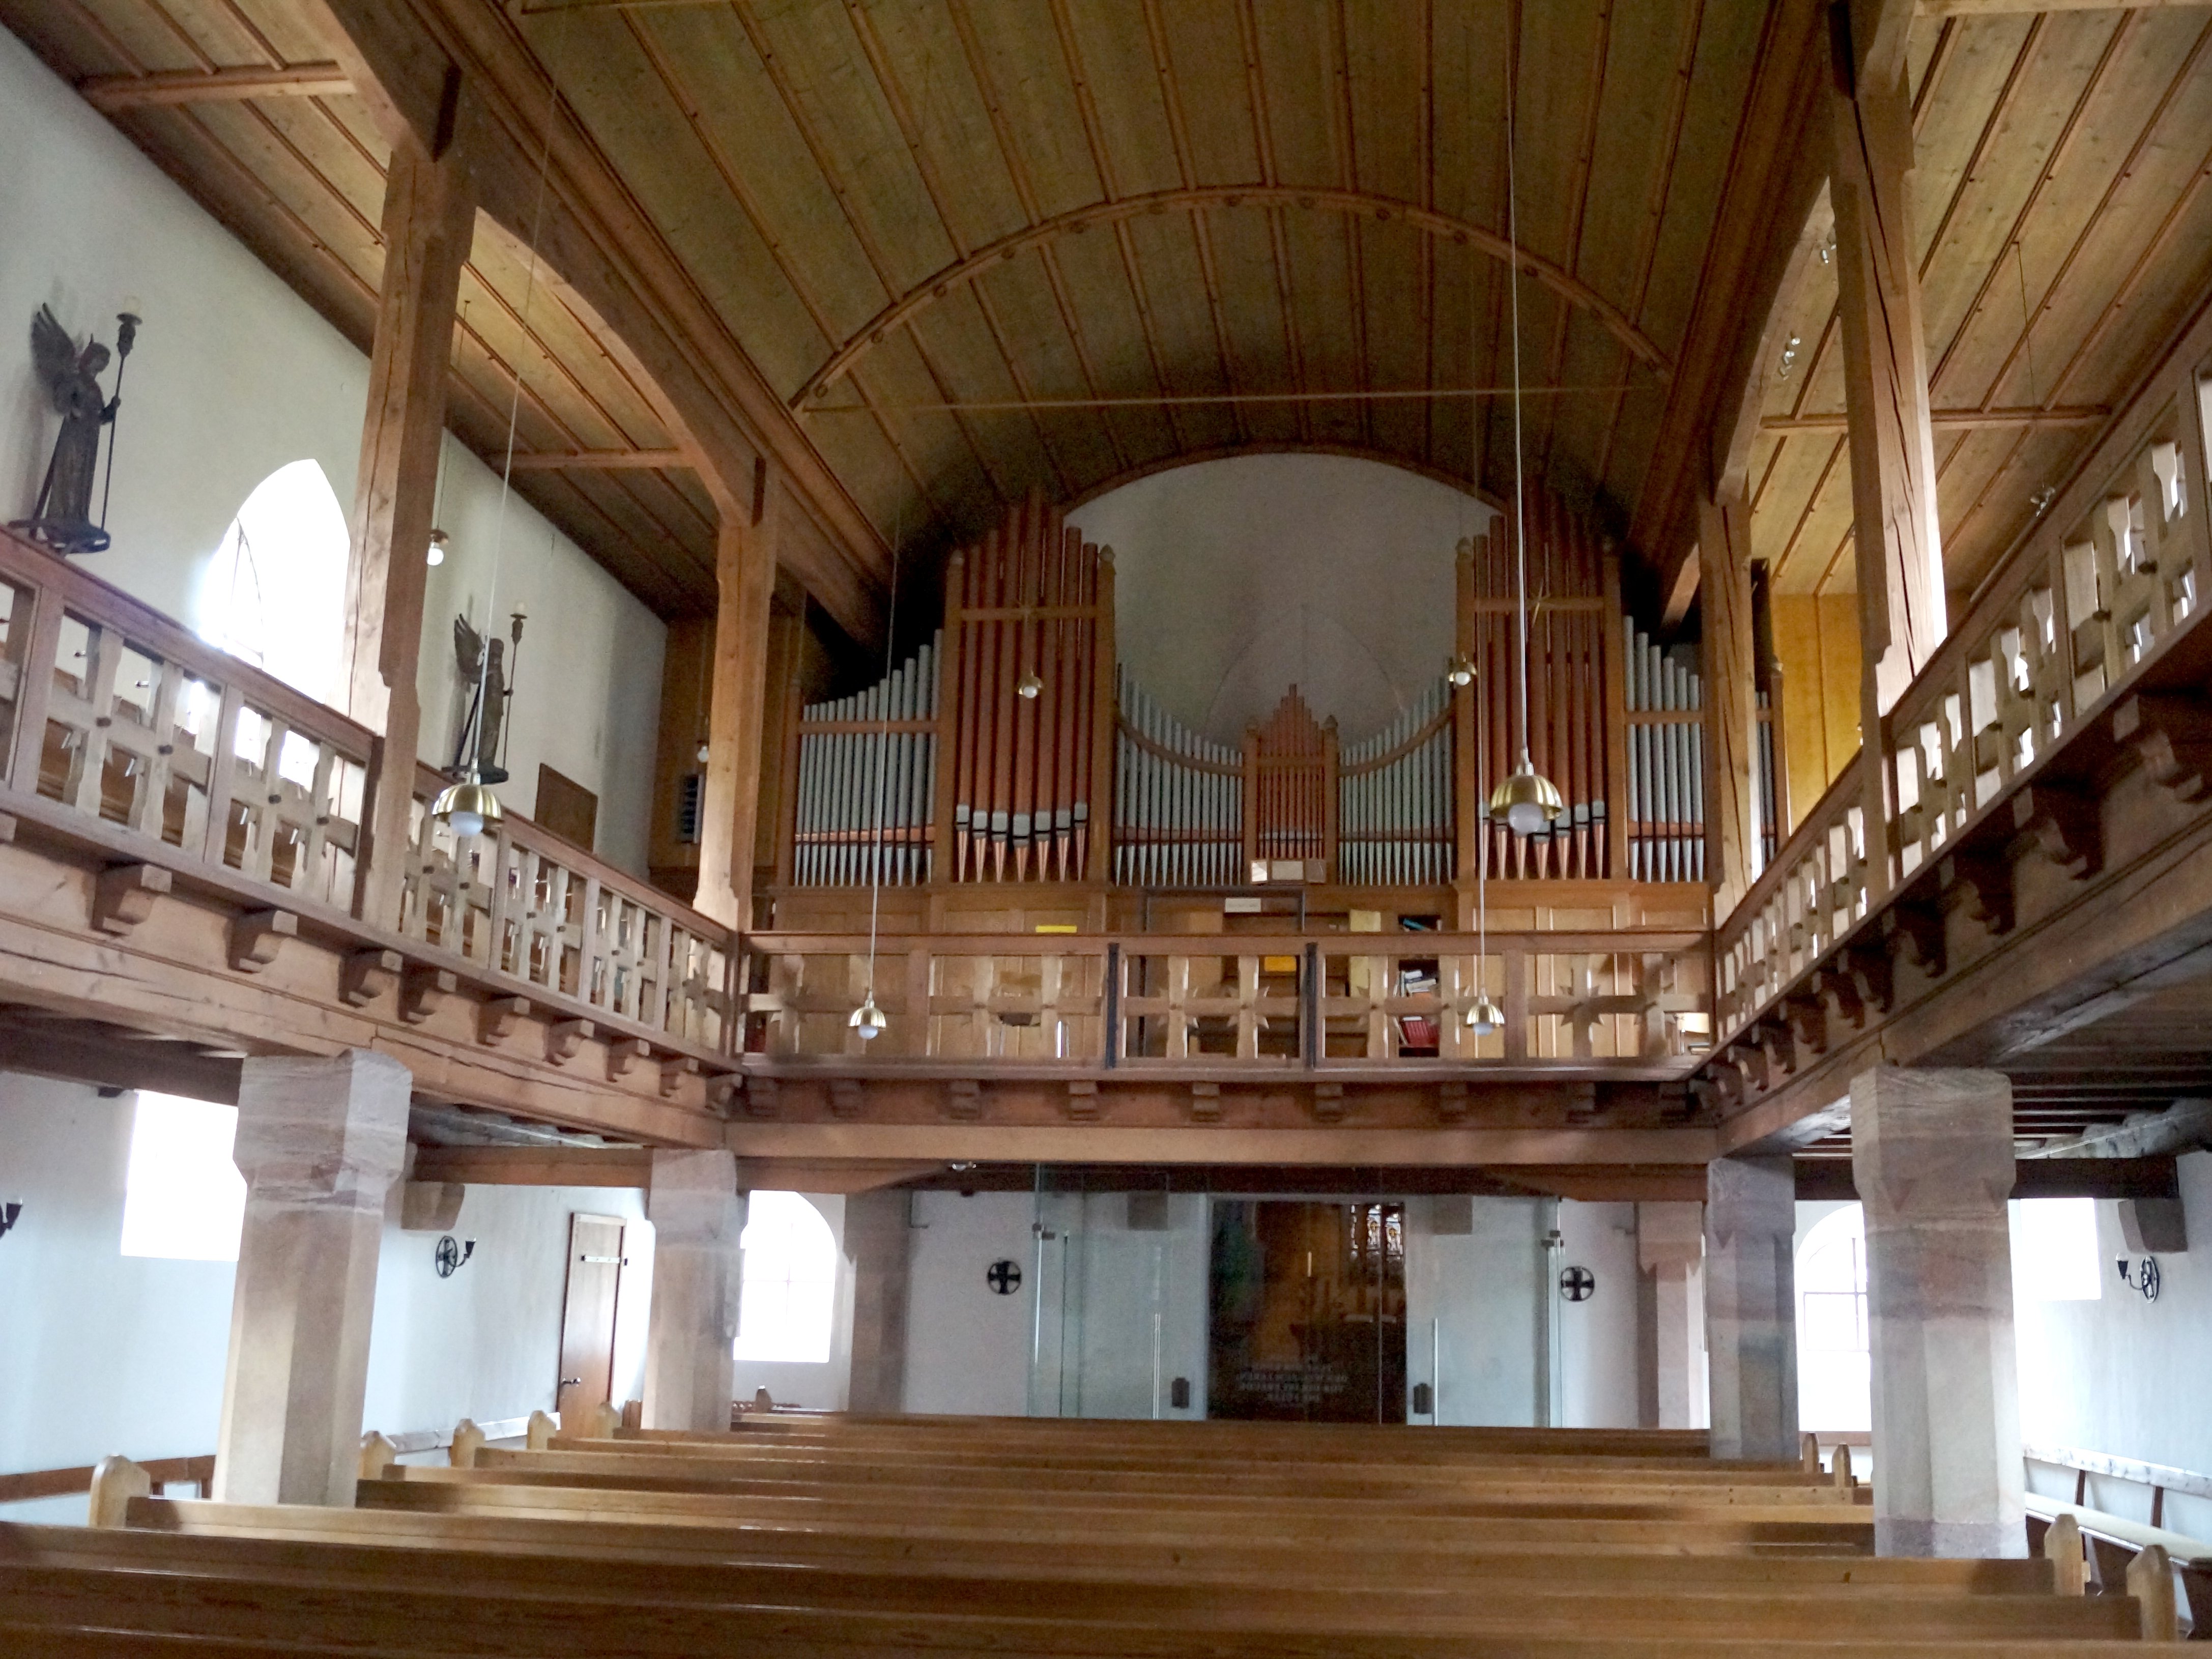 Interior view of the organ of the Protestant Church St James